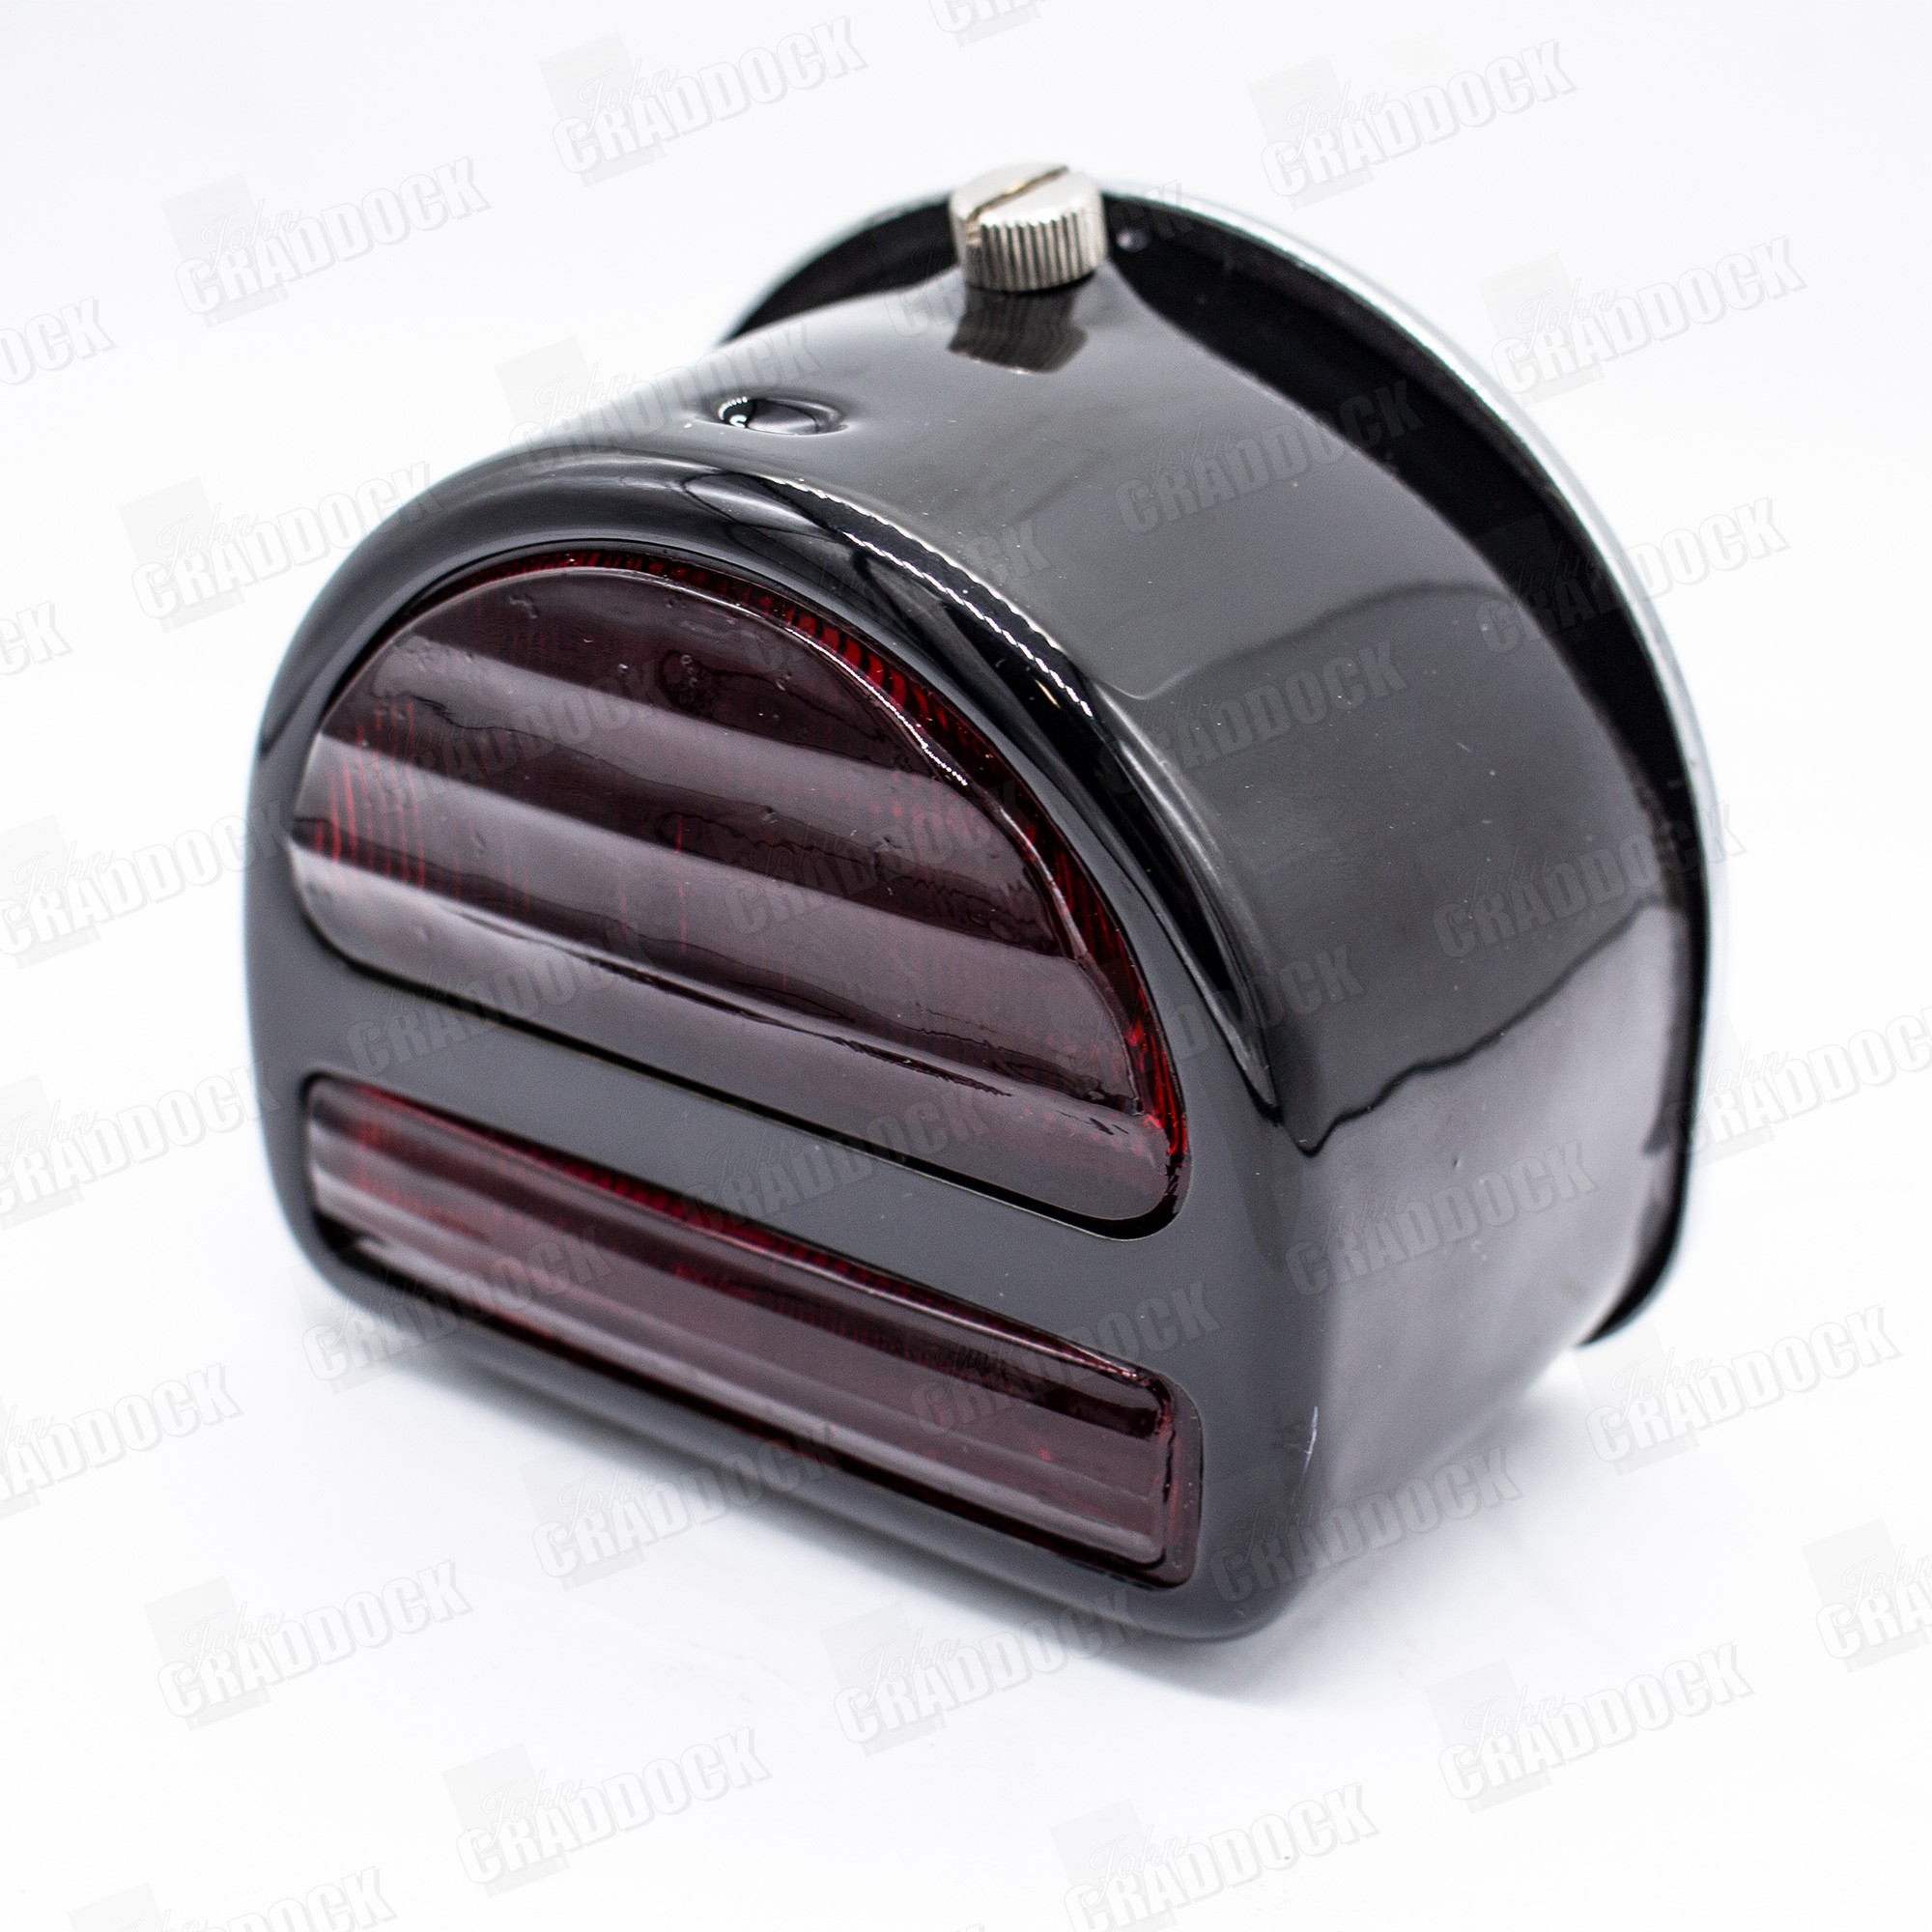 Rear D Lamp with Bar 1948-54 Non Genuine